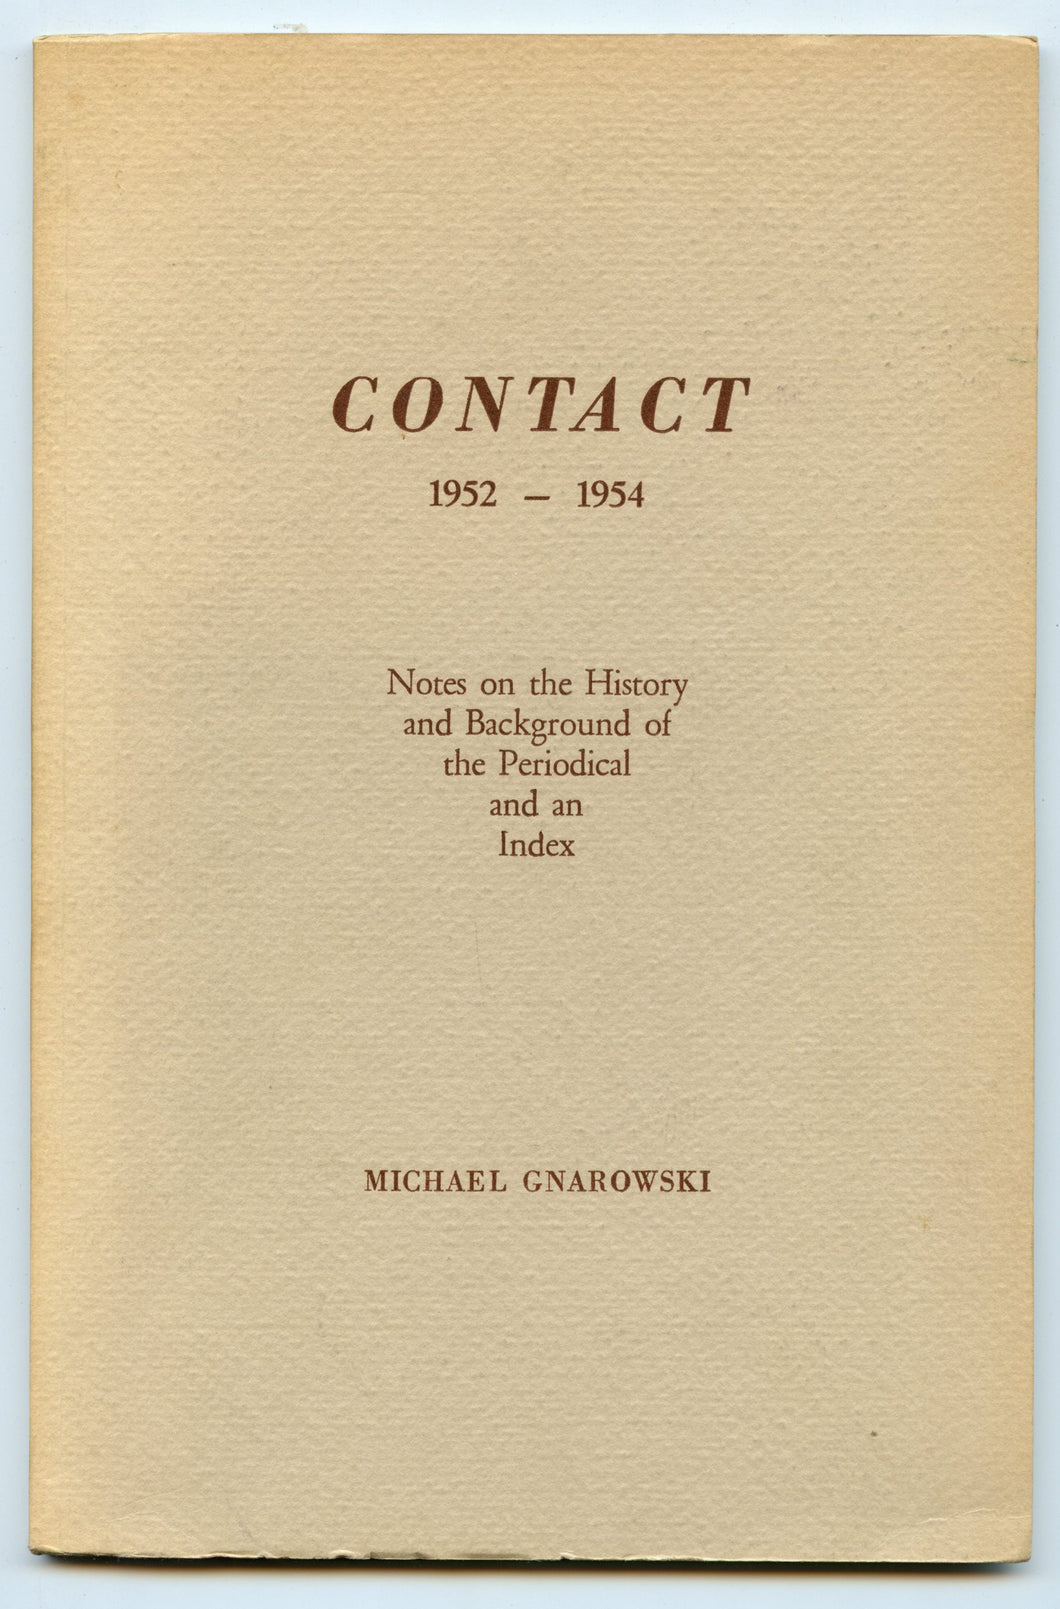 Contact 1952-1954. Notes on the History and Background of the Periodical and an Index